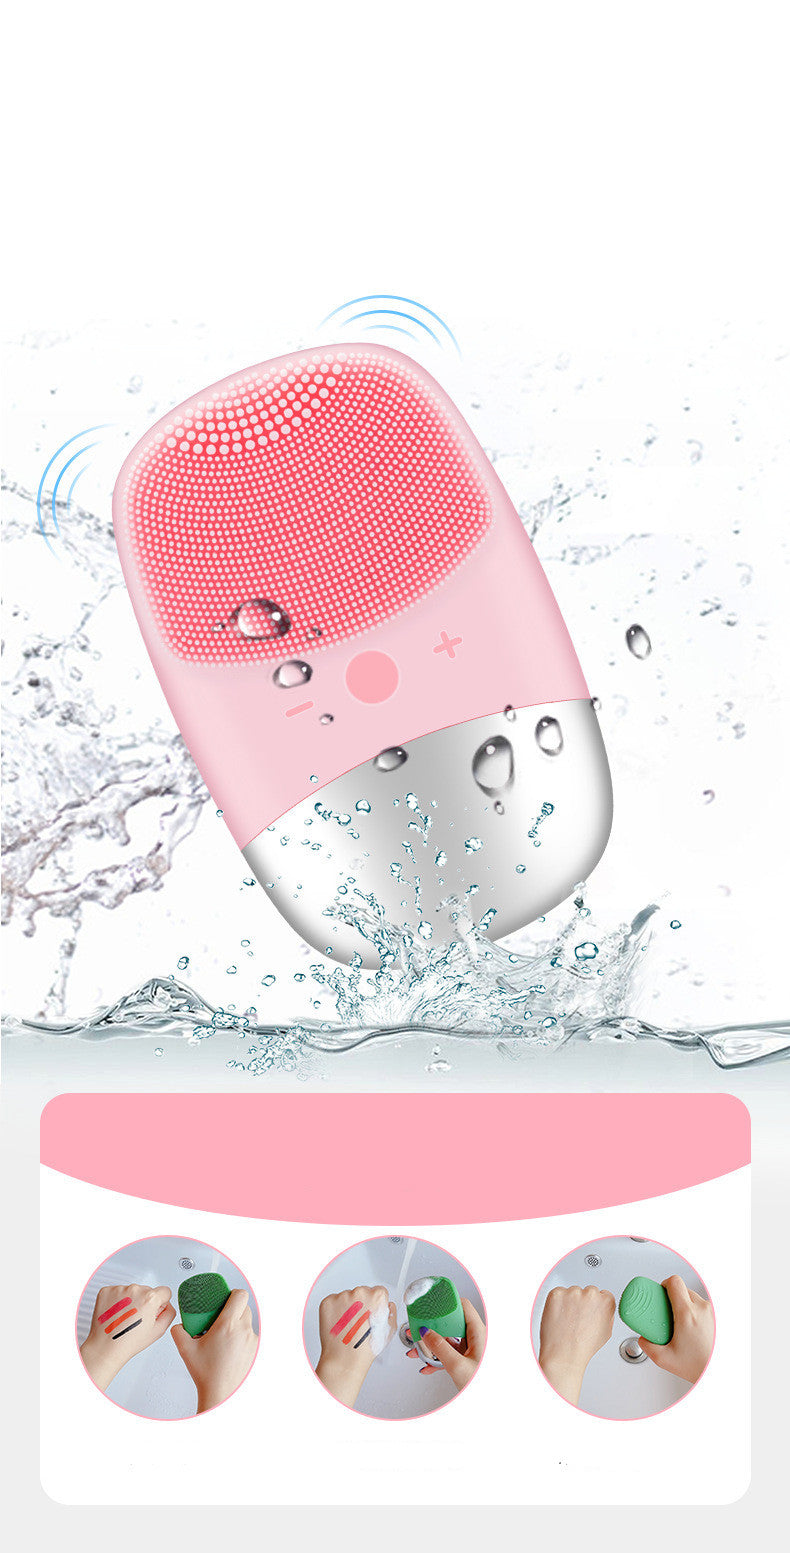 Mini Silicone Electric Face Cleansing Brush Electric Facial Cleanser Sonic Facial Cleansing Brush Skin Massager Skin Care Tools